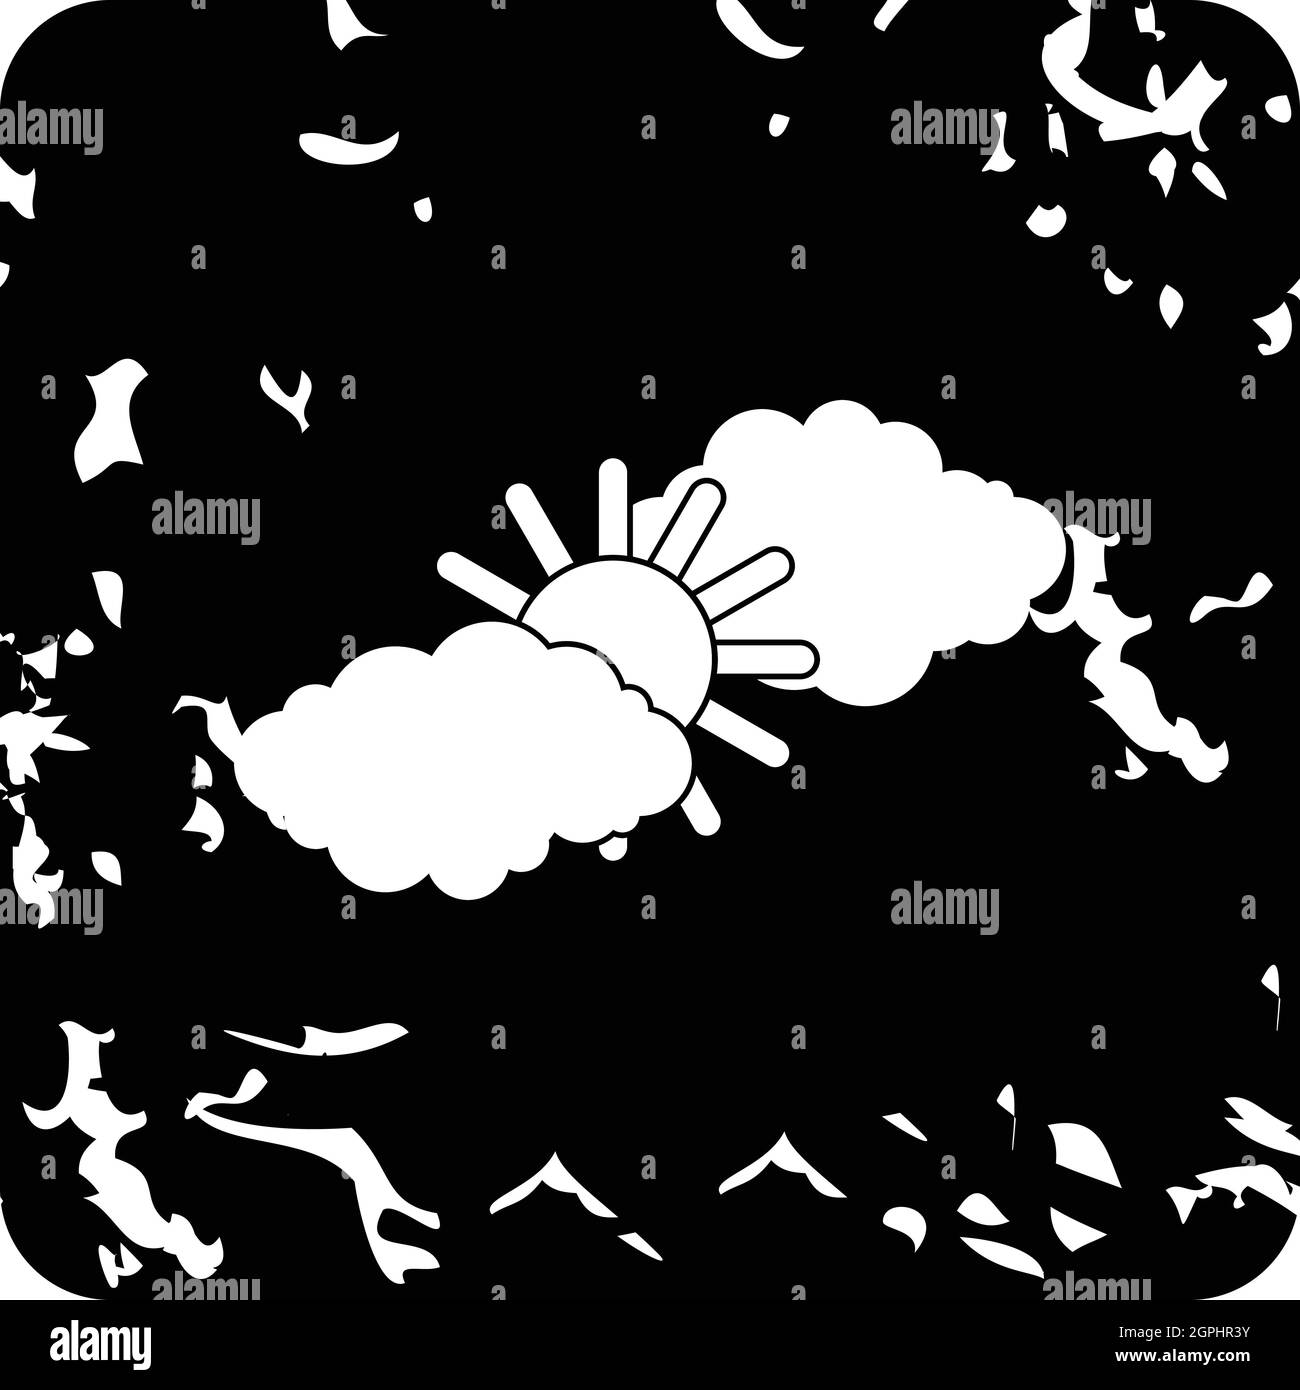 Cloud and sun icon, grunge style Stock Vector